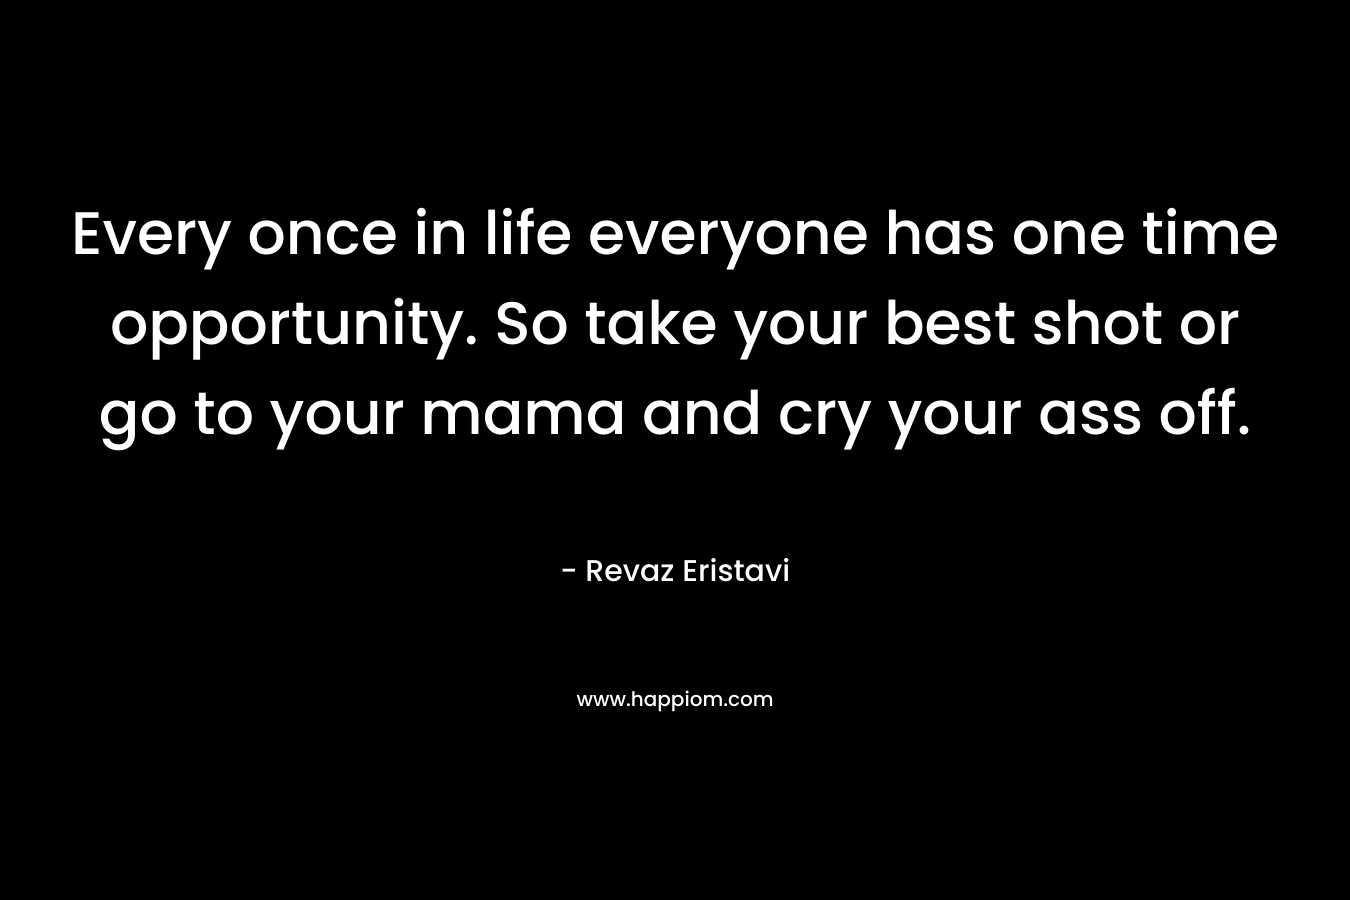 Every once in life everyone has one time opportunity. So take your best shot or go to your mama and cry your ass off. – Revaz Eristavi